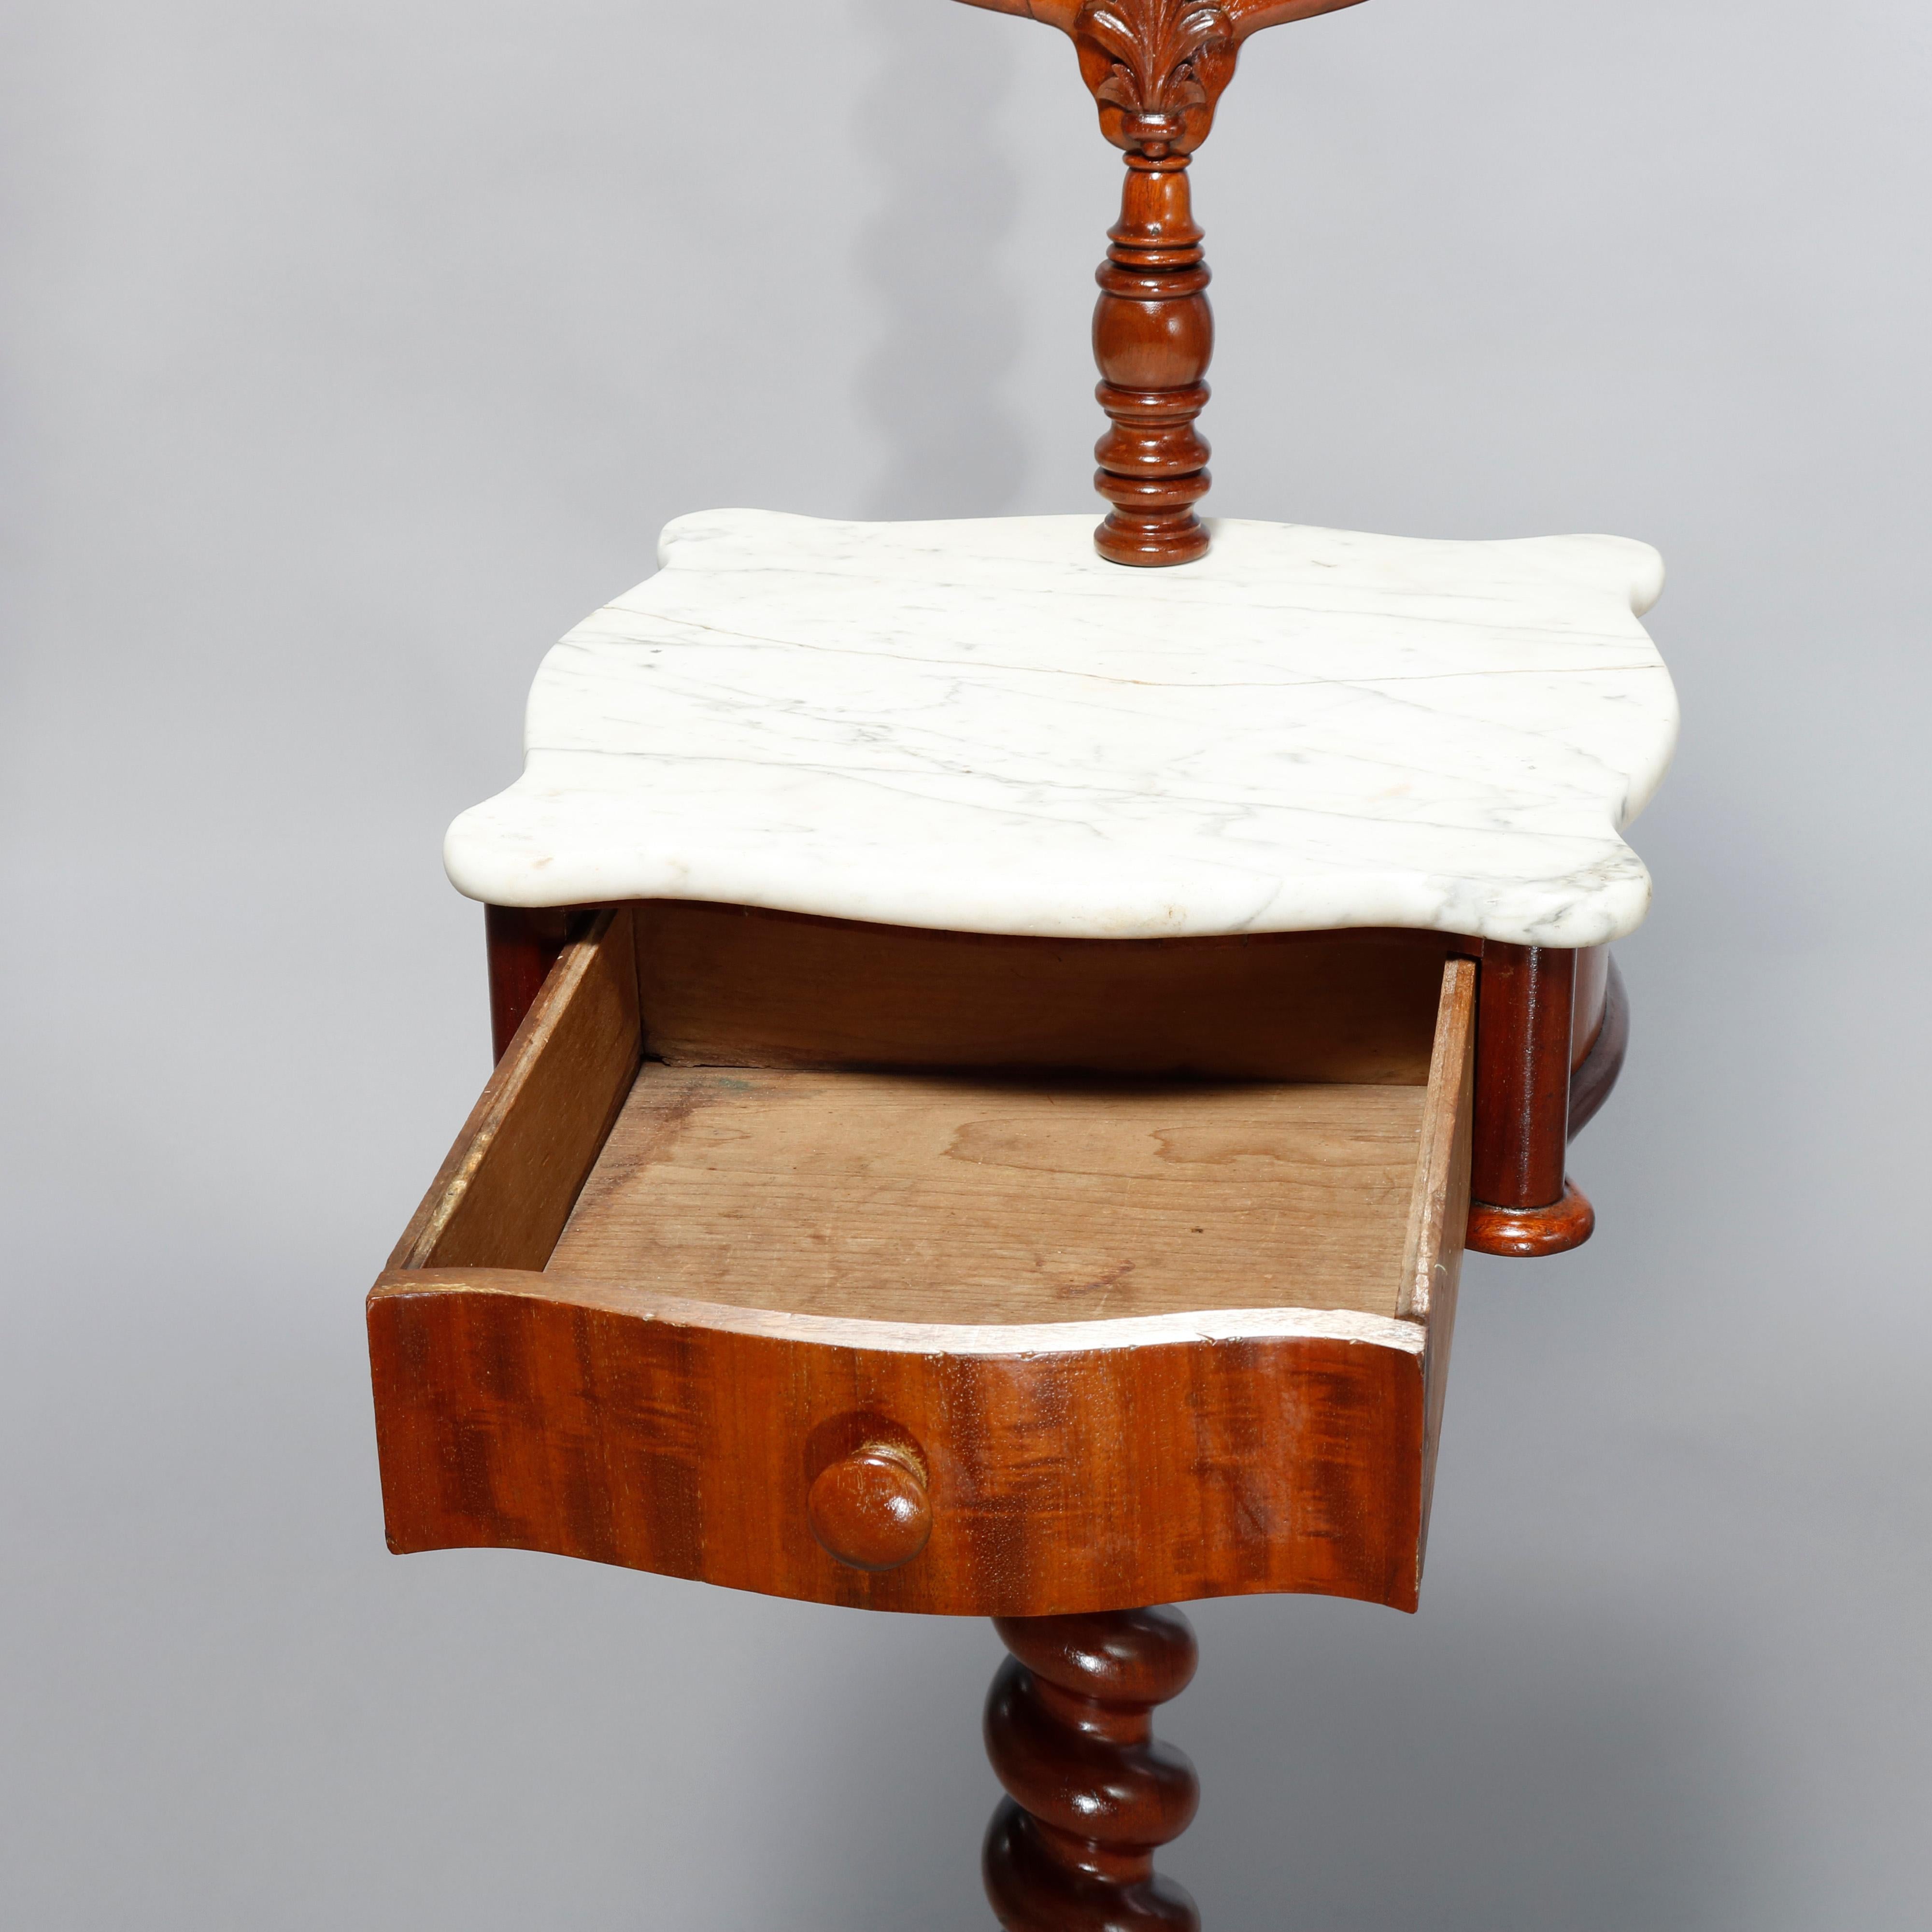 Carved Antique Victorian Rosewood Marble-Top Shaving Mirror Stand, Circa 1880